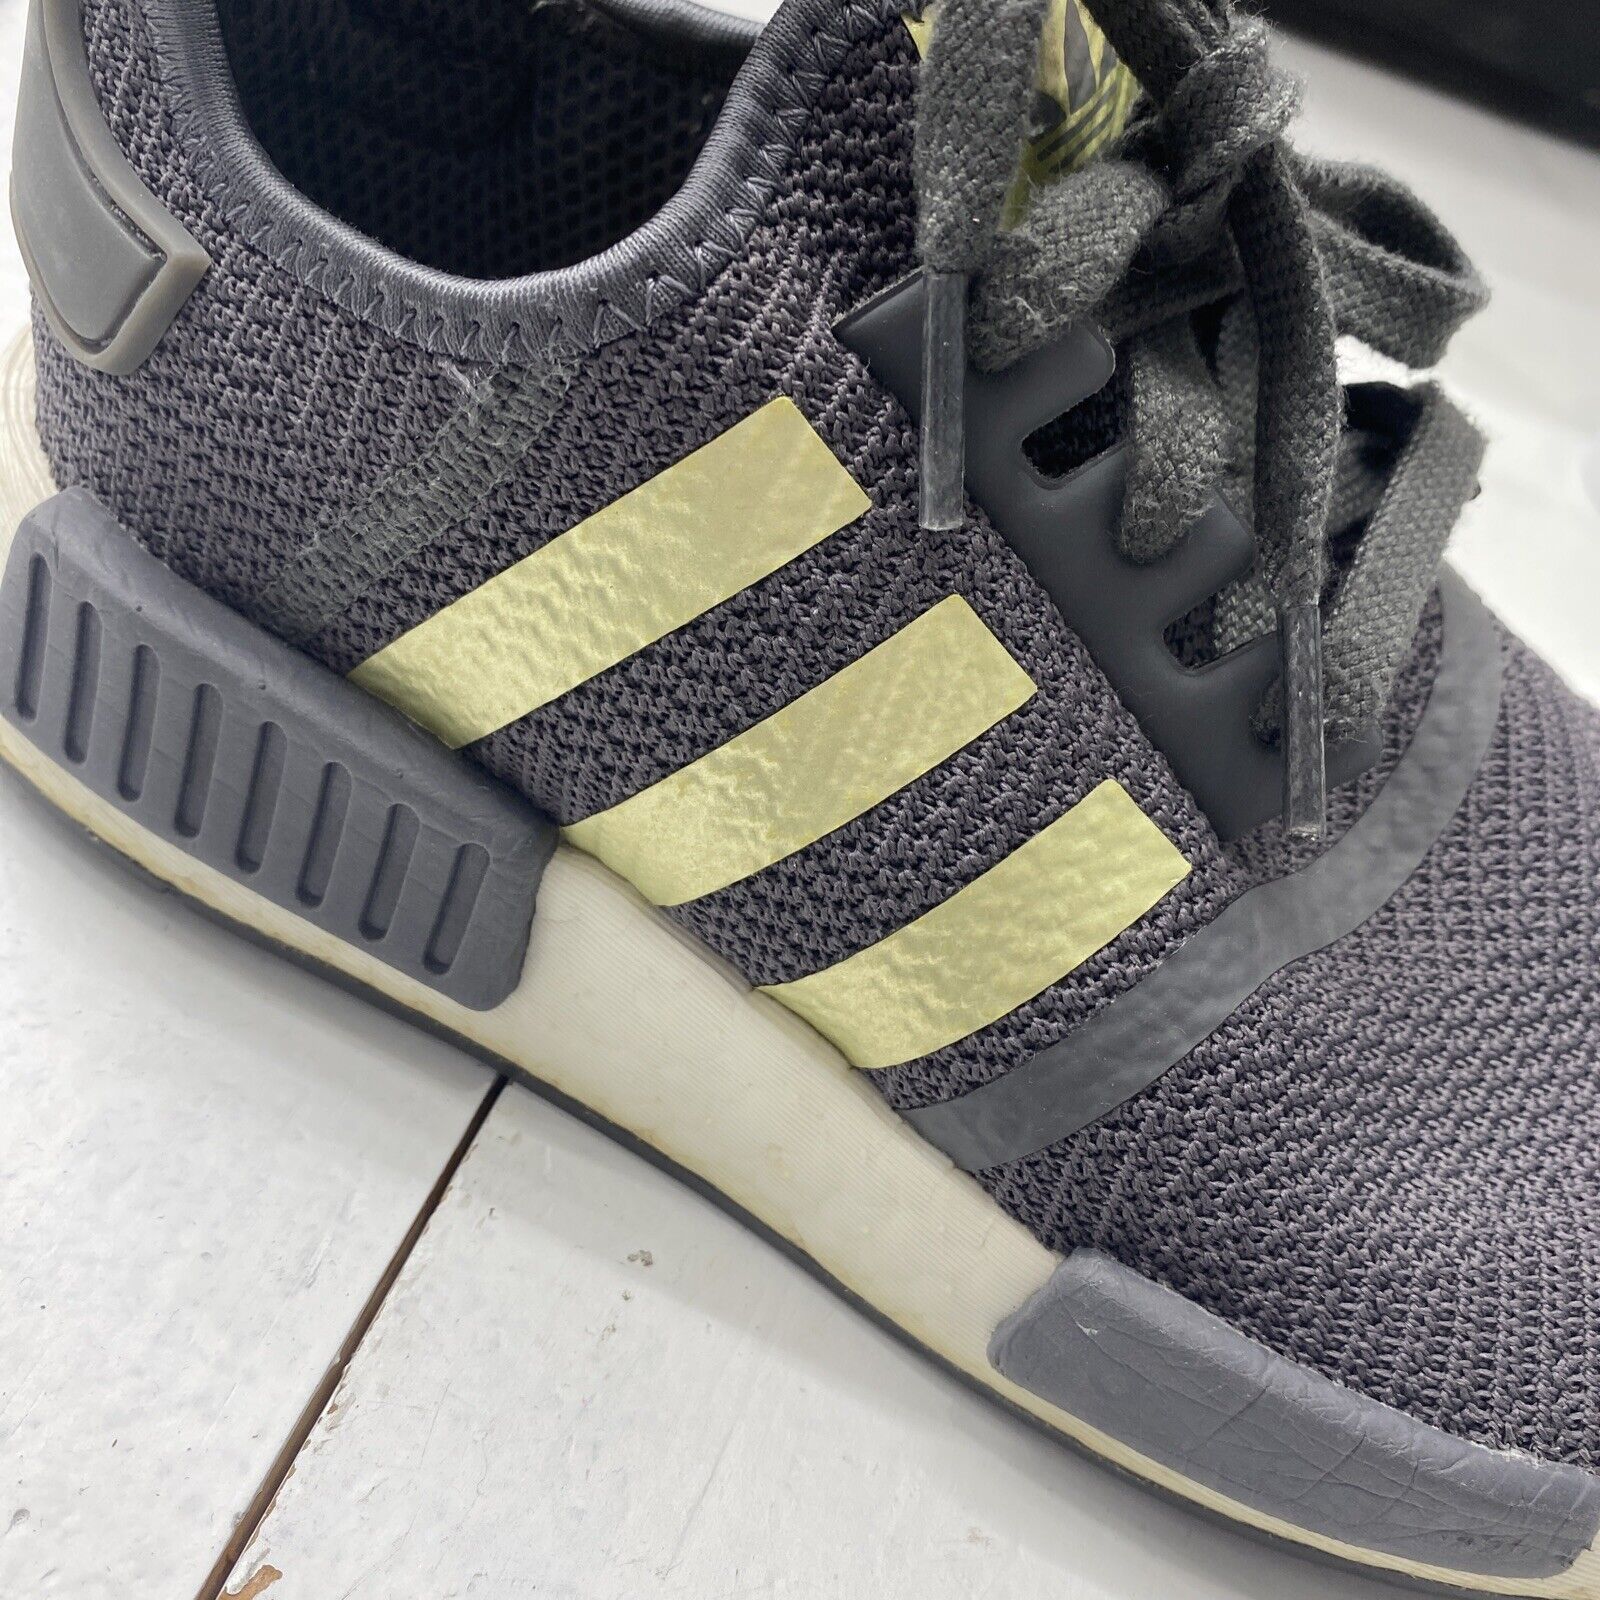 flygtninge Marvel slump Adidas B37651 NMD R1 Gray Running Shoes Lace Up Low Top Women's Size 7 -  beyond exchange